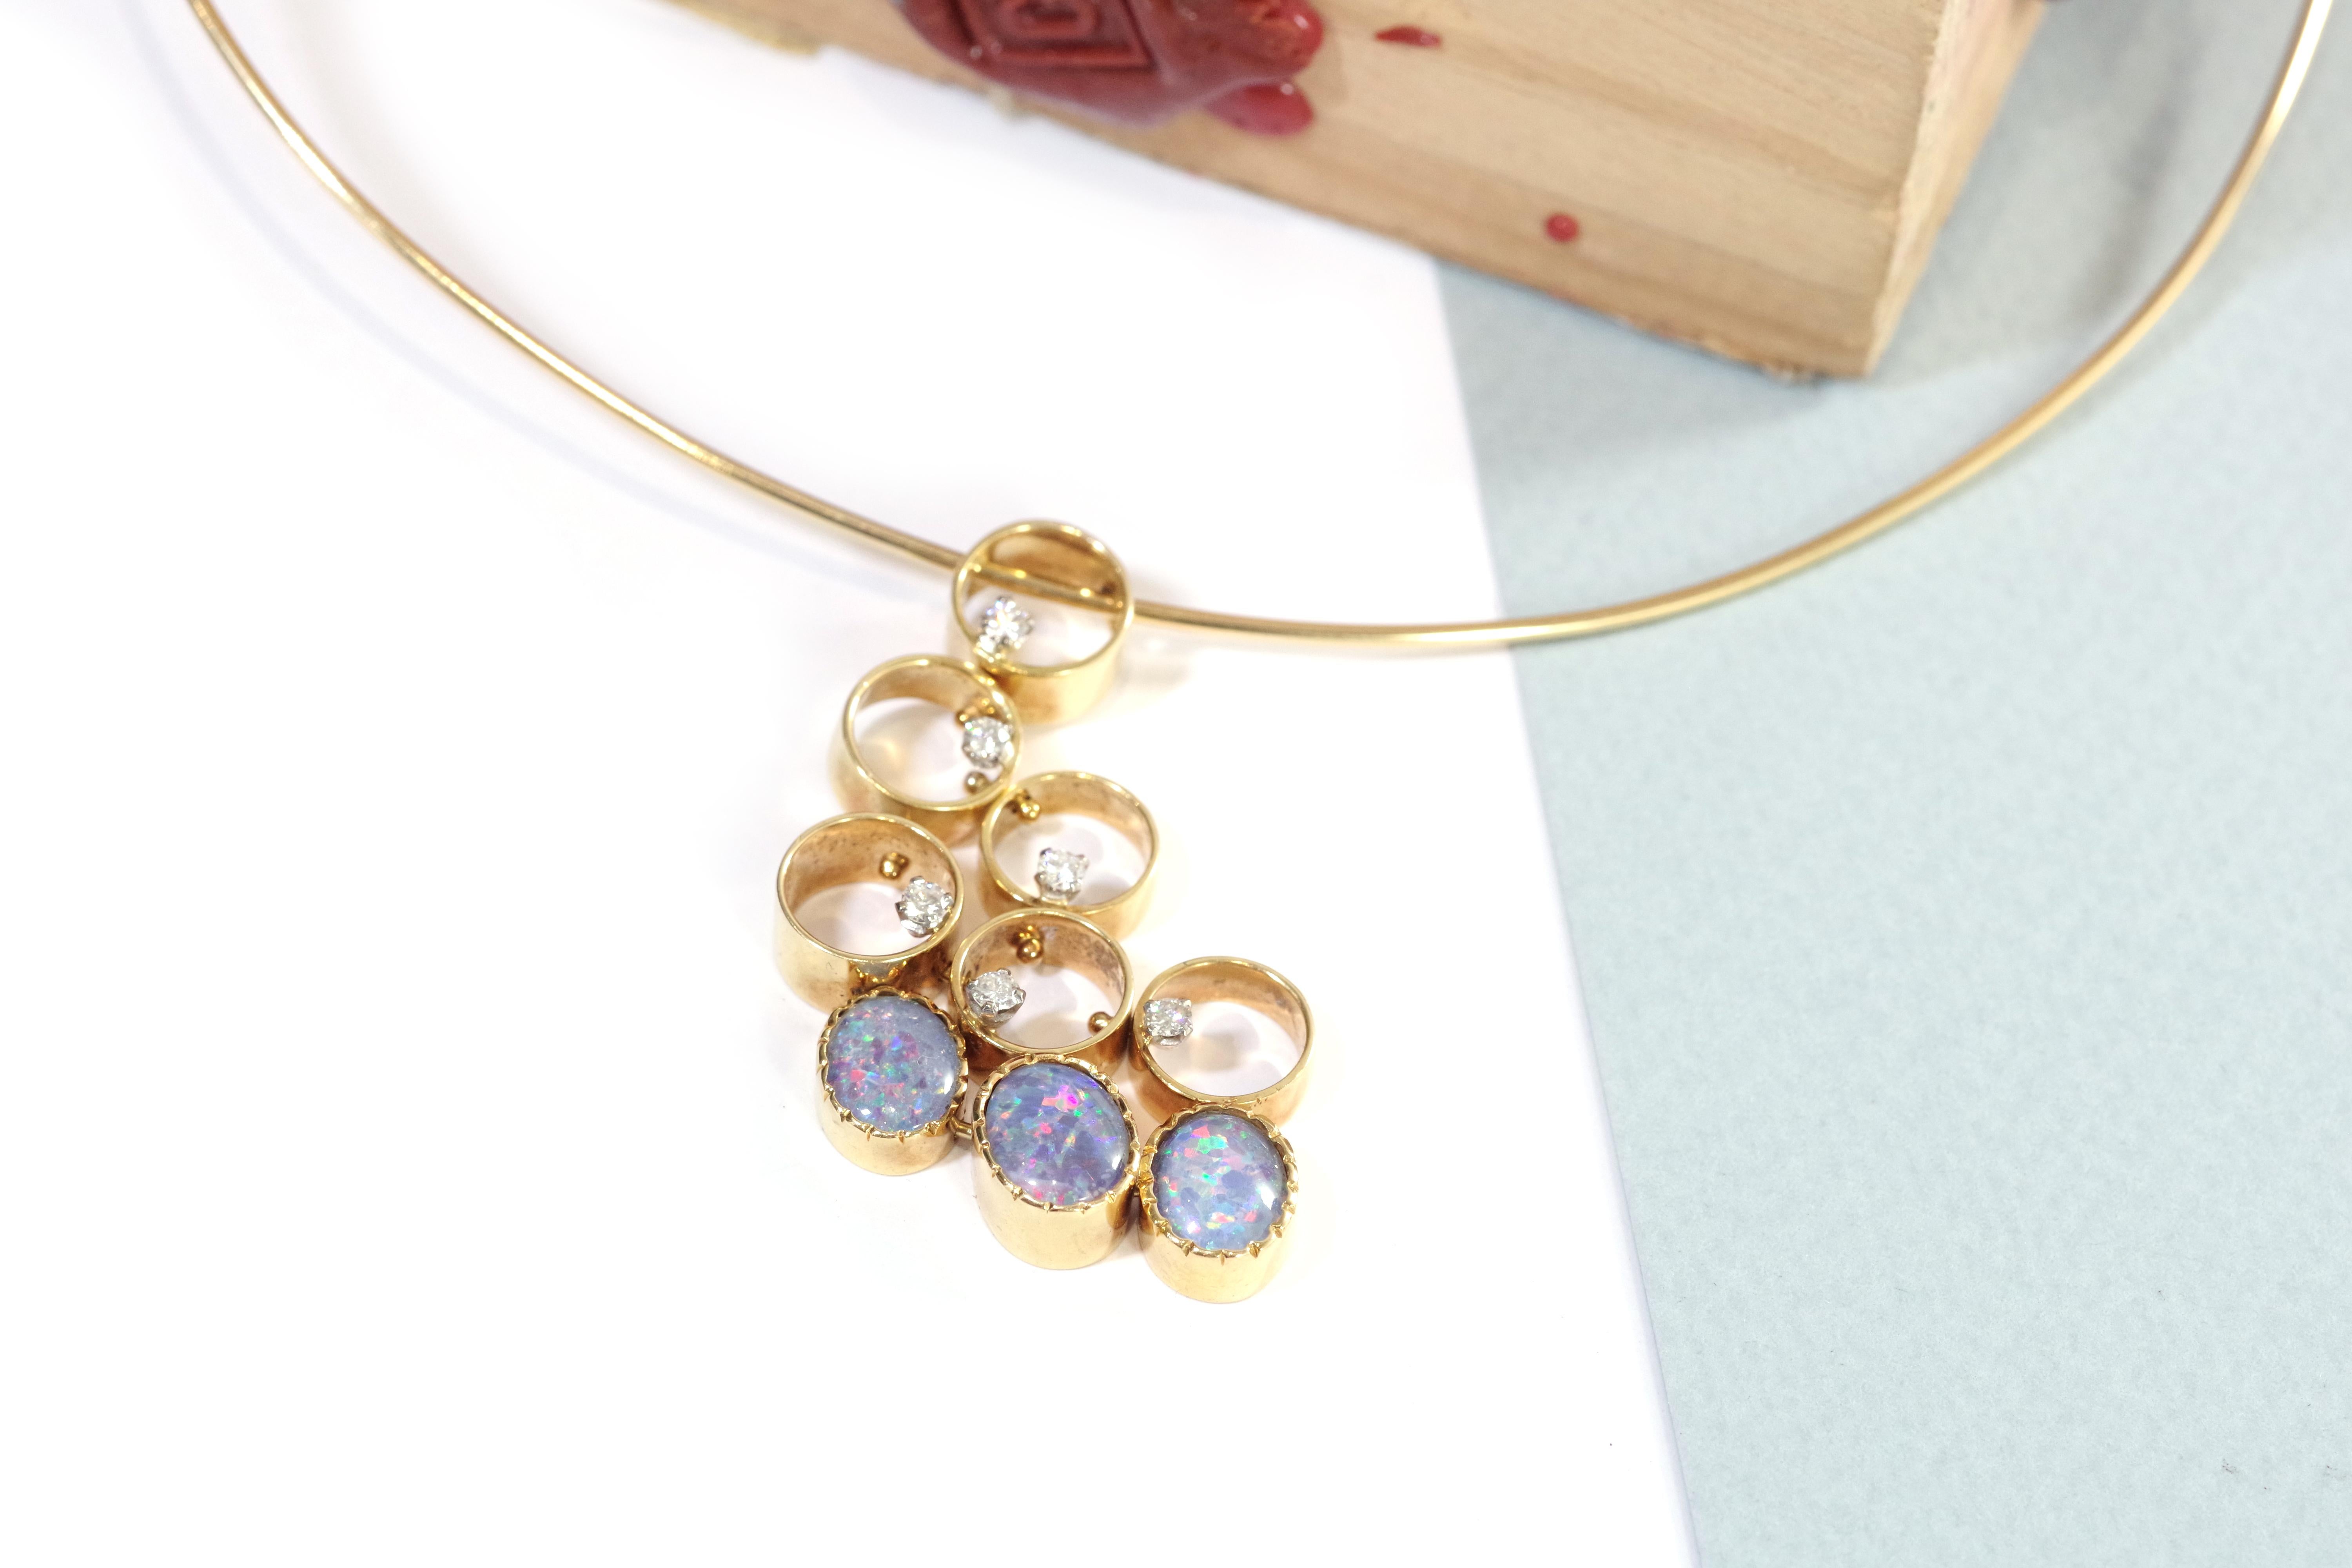 Modernist triplets opals diamond necklace in 18-karat yellow gold (750 thousandths). Original necklace formed by a rigid hoop holding a pendant composed of articulated circular gold elements, adorned with six brilliant-cut diamonds, and three oval